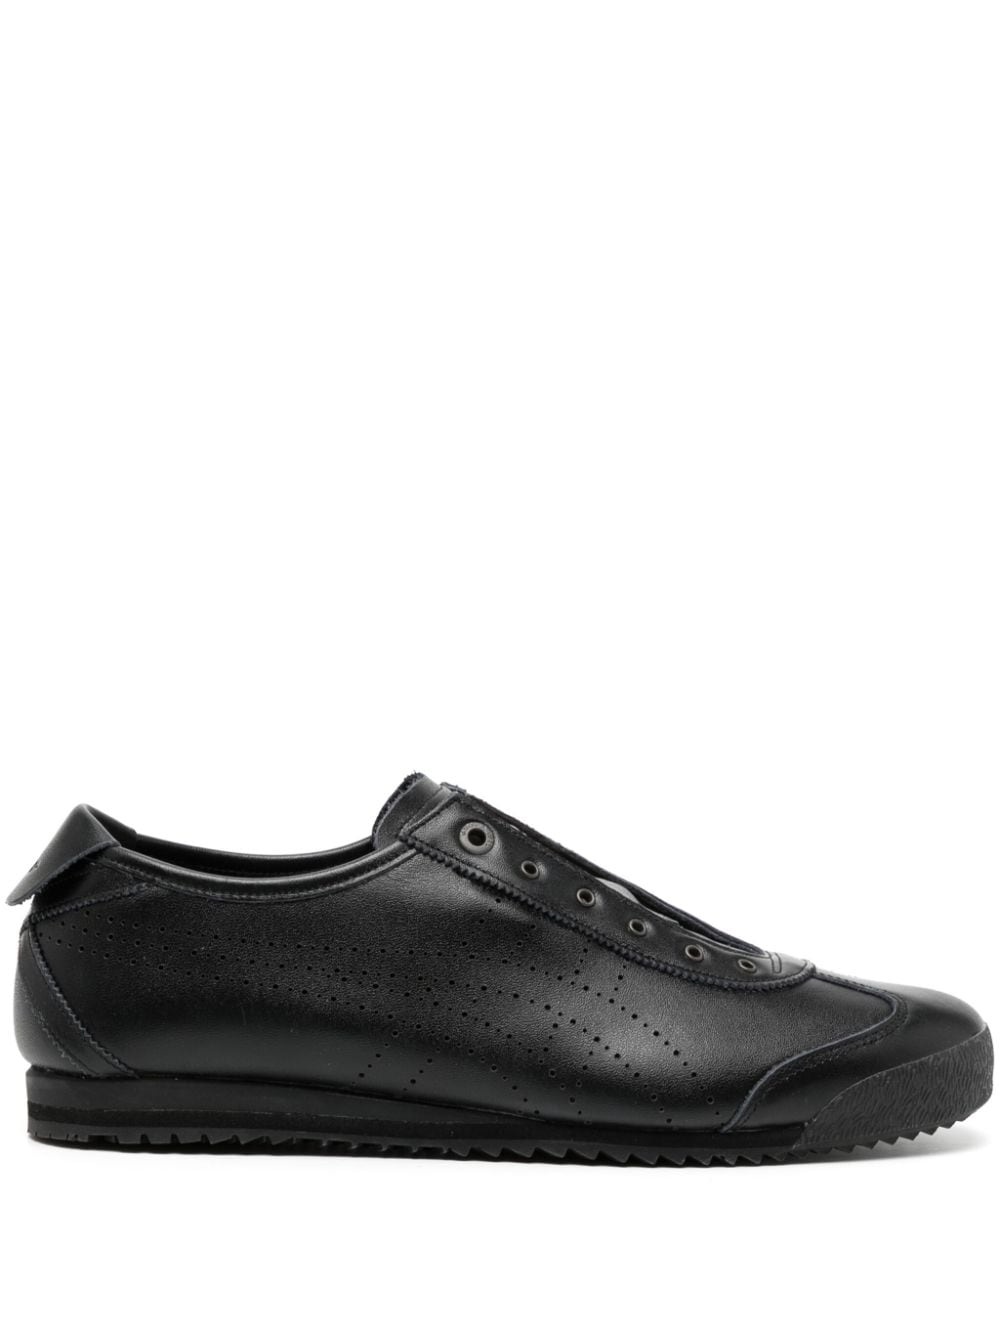 Onitsuka Tiger Mexico 66™ slip-on sneakers Black